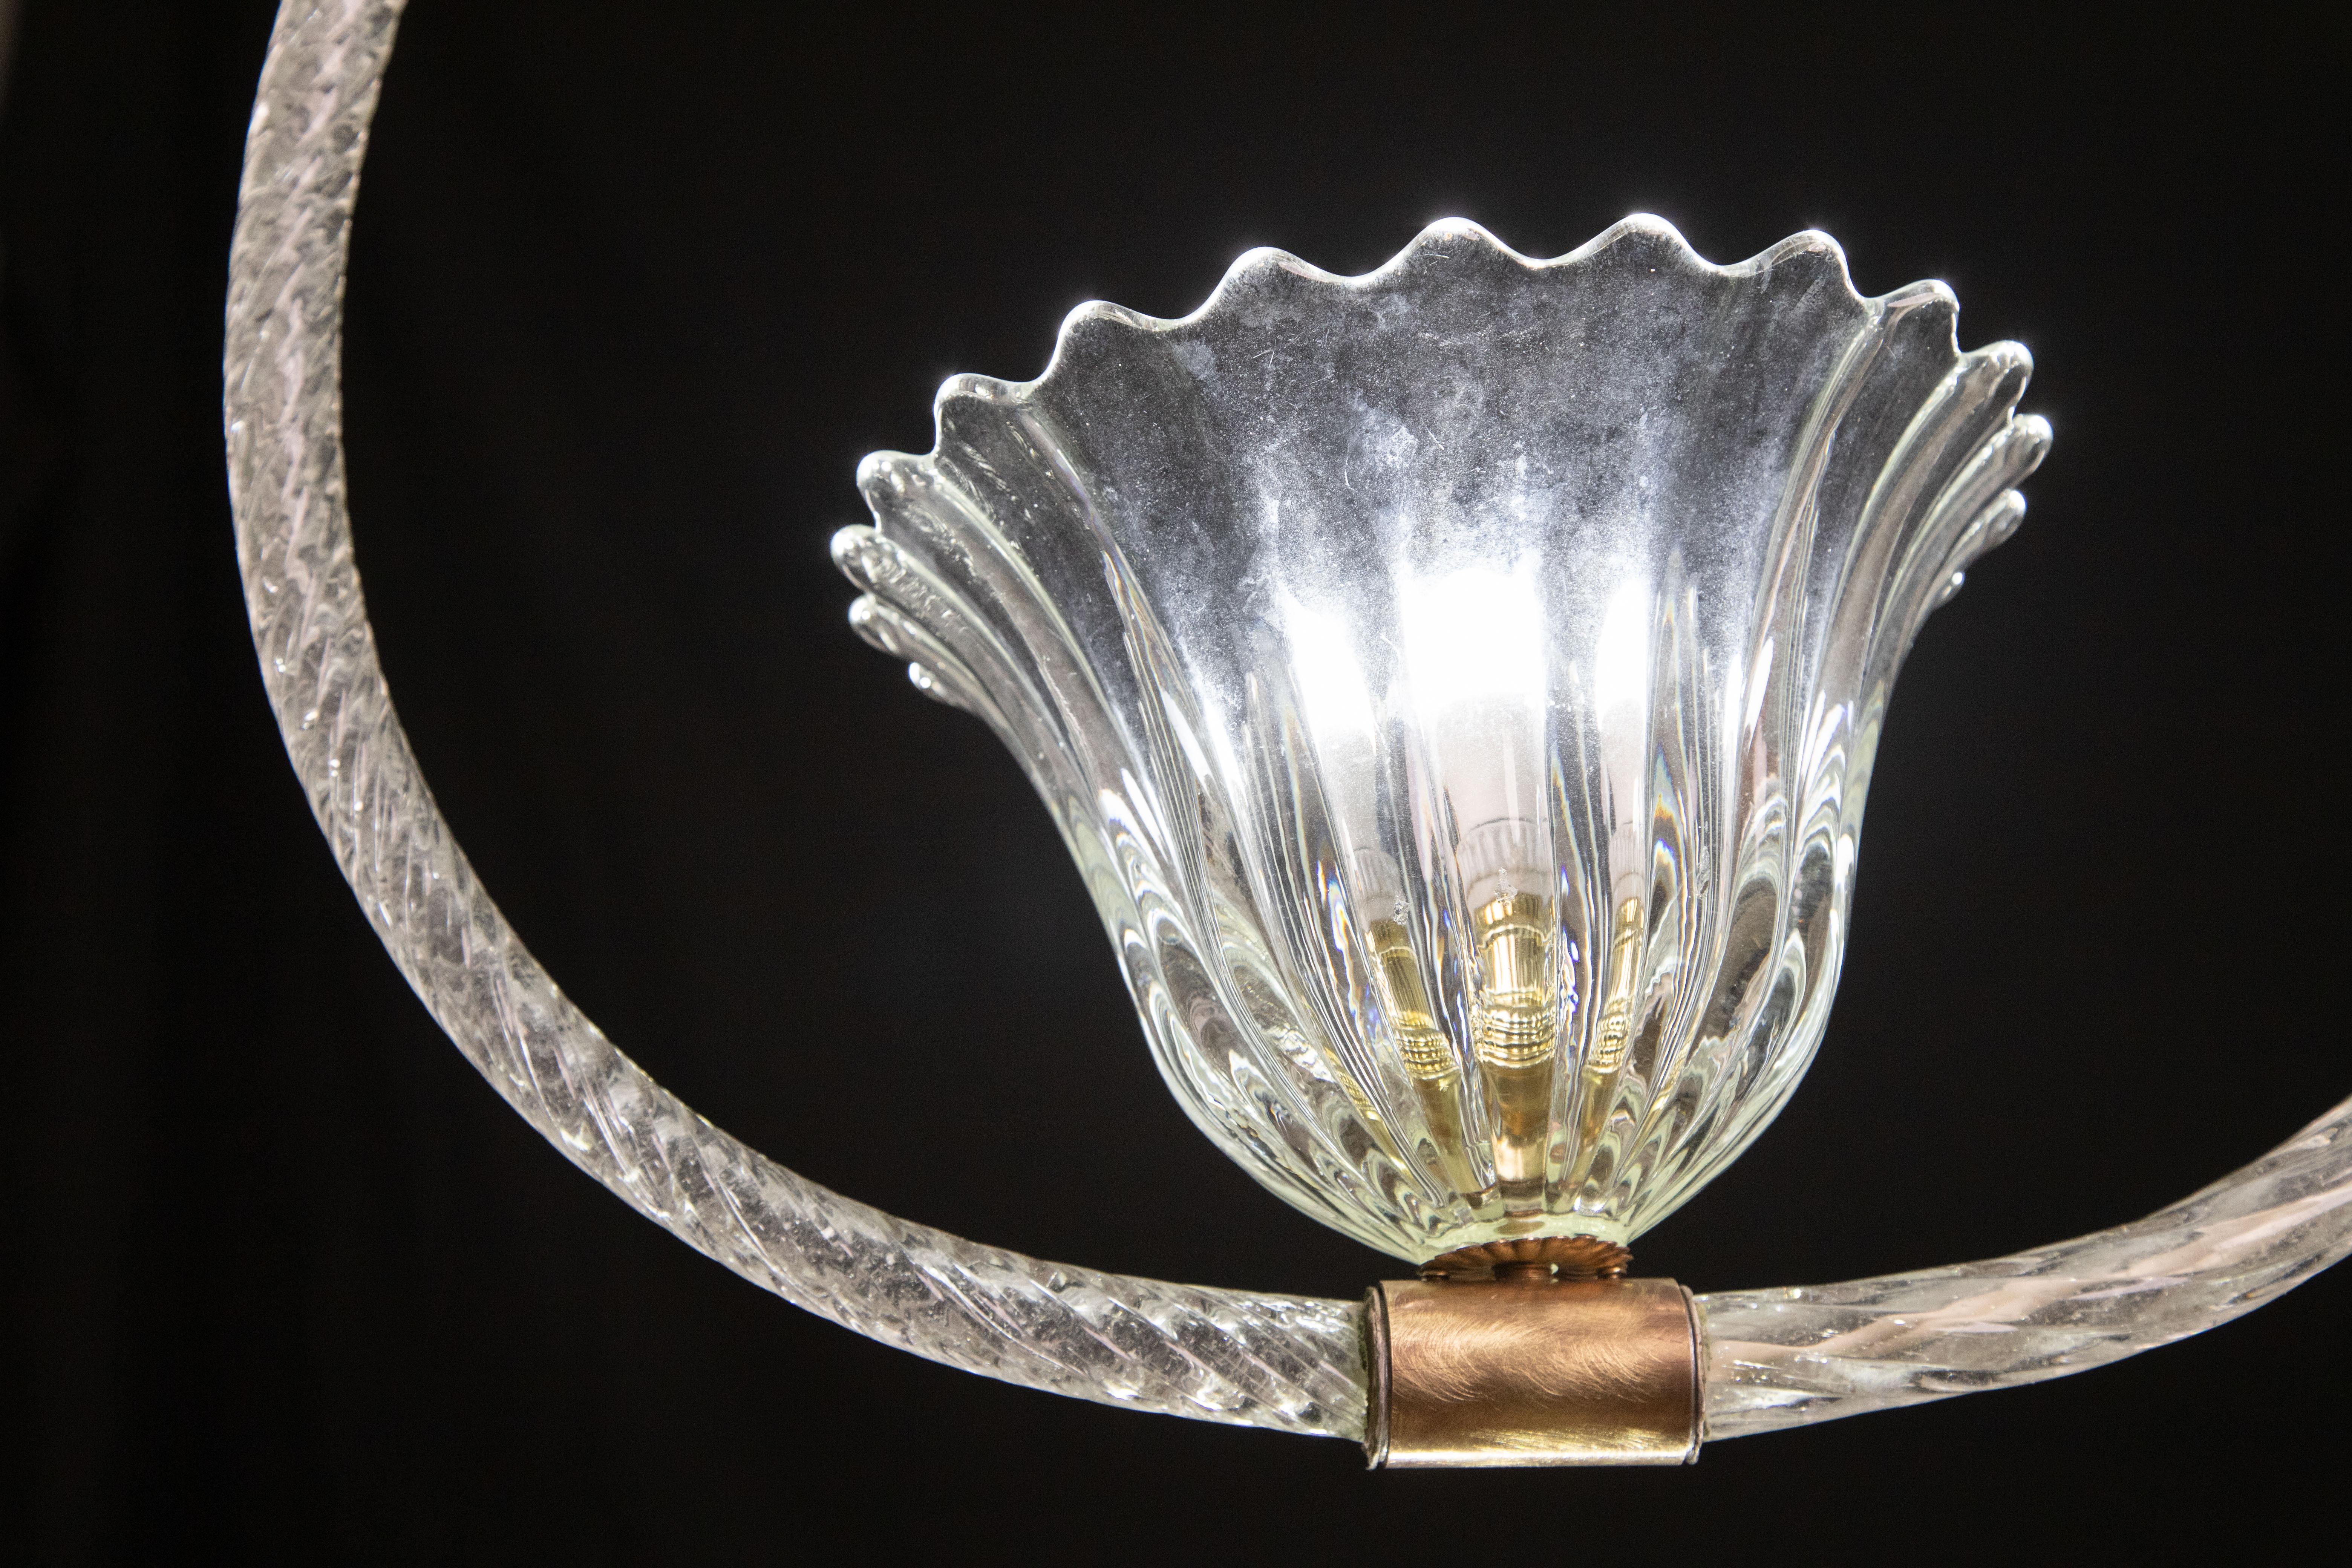 Set of 2 Barovier and Toso Light Pendant, Murano Glass, 1940s For Sale 3